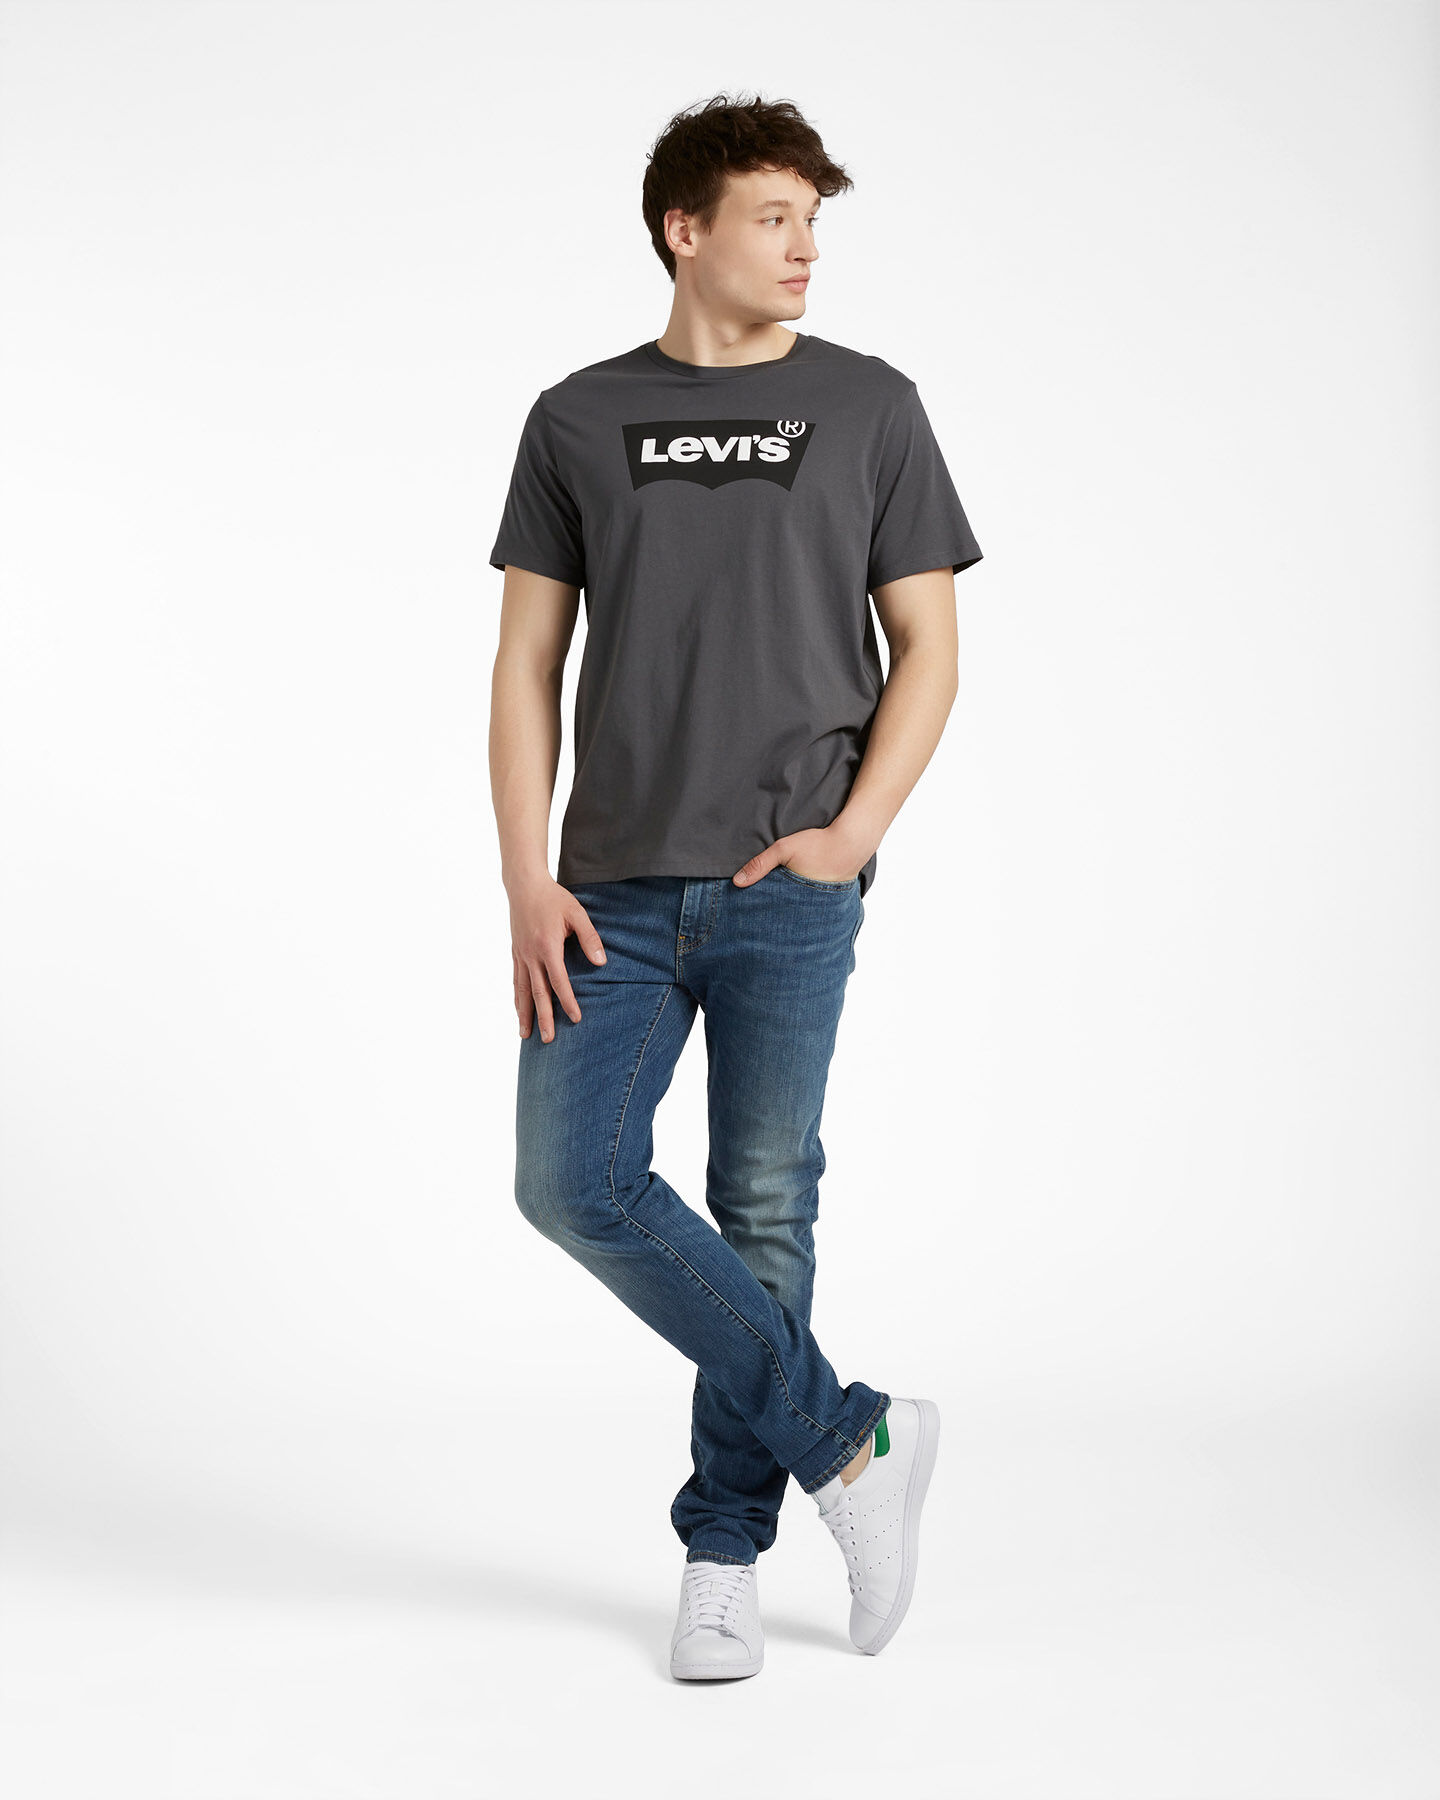  T-Shirt LEVI'S GRAPHIC LOG M S4087713|0248|XS scatto 1